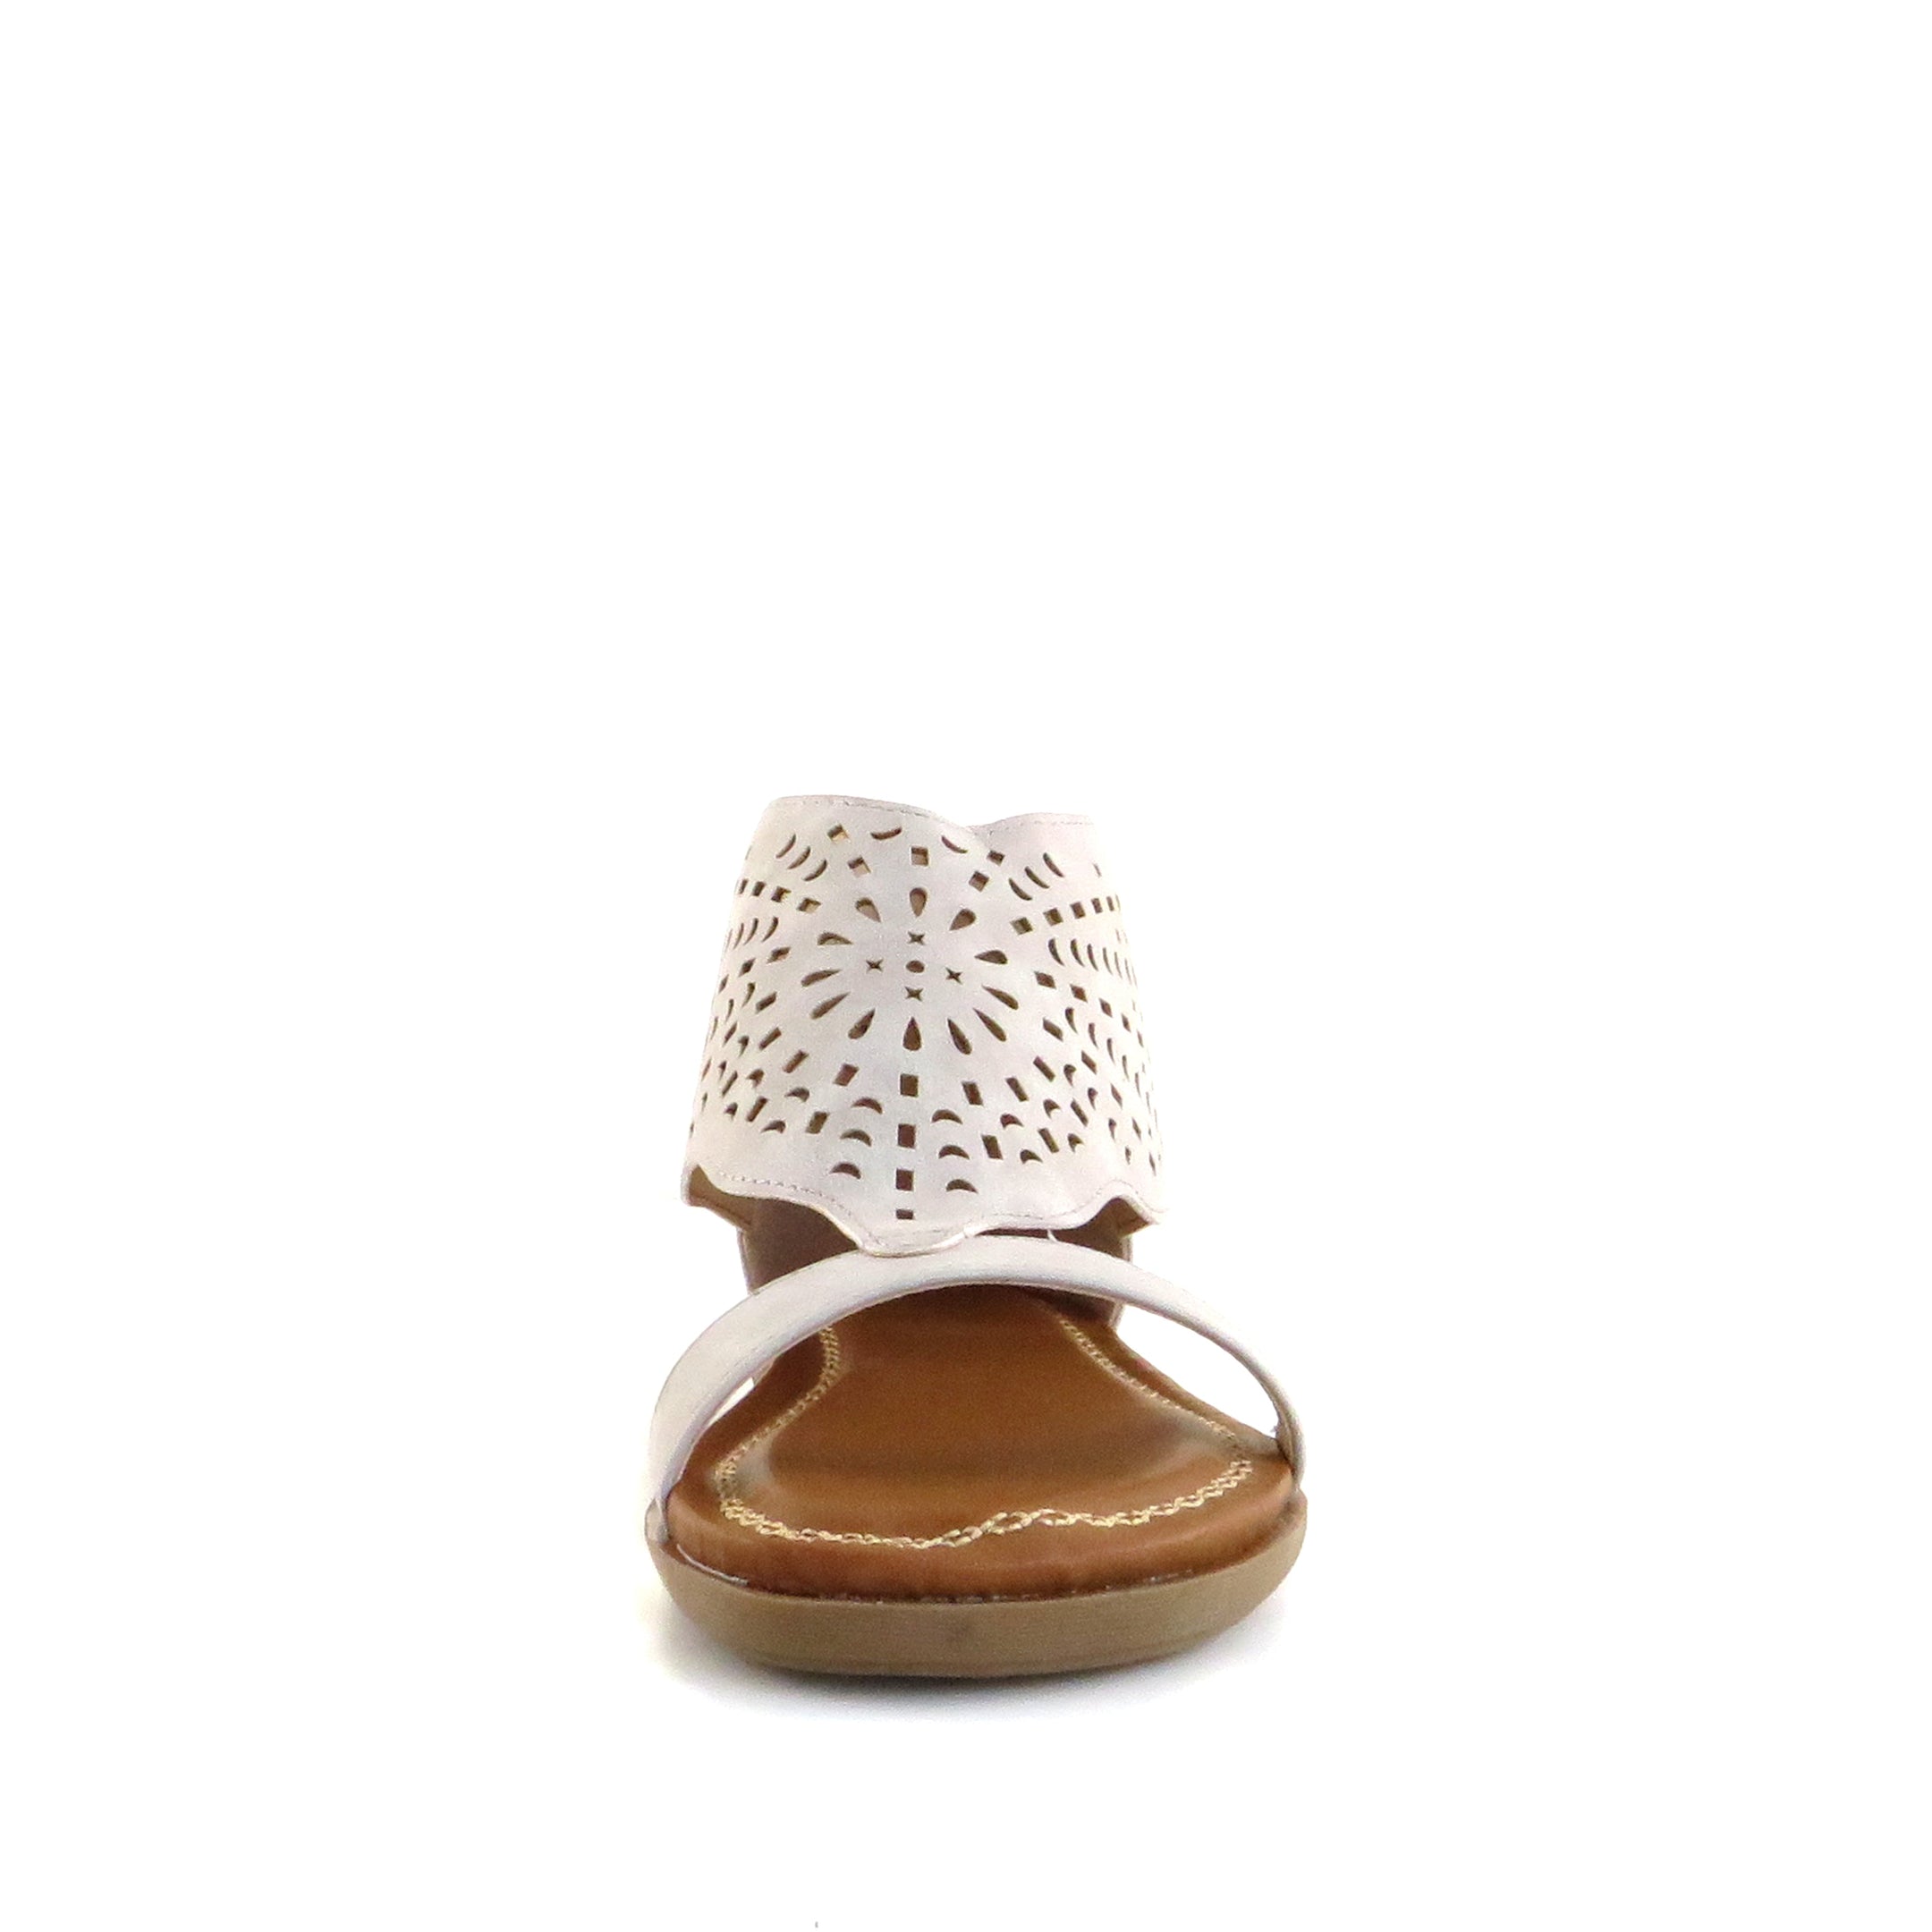 Women's Crissy Stone Perforated Sandal